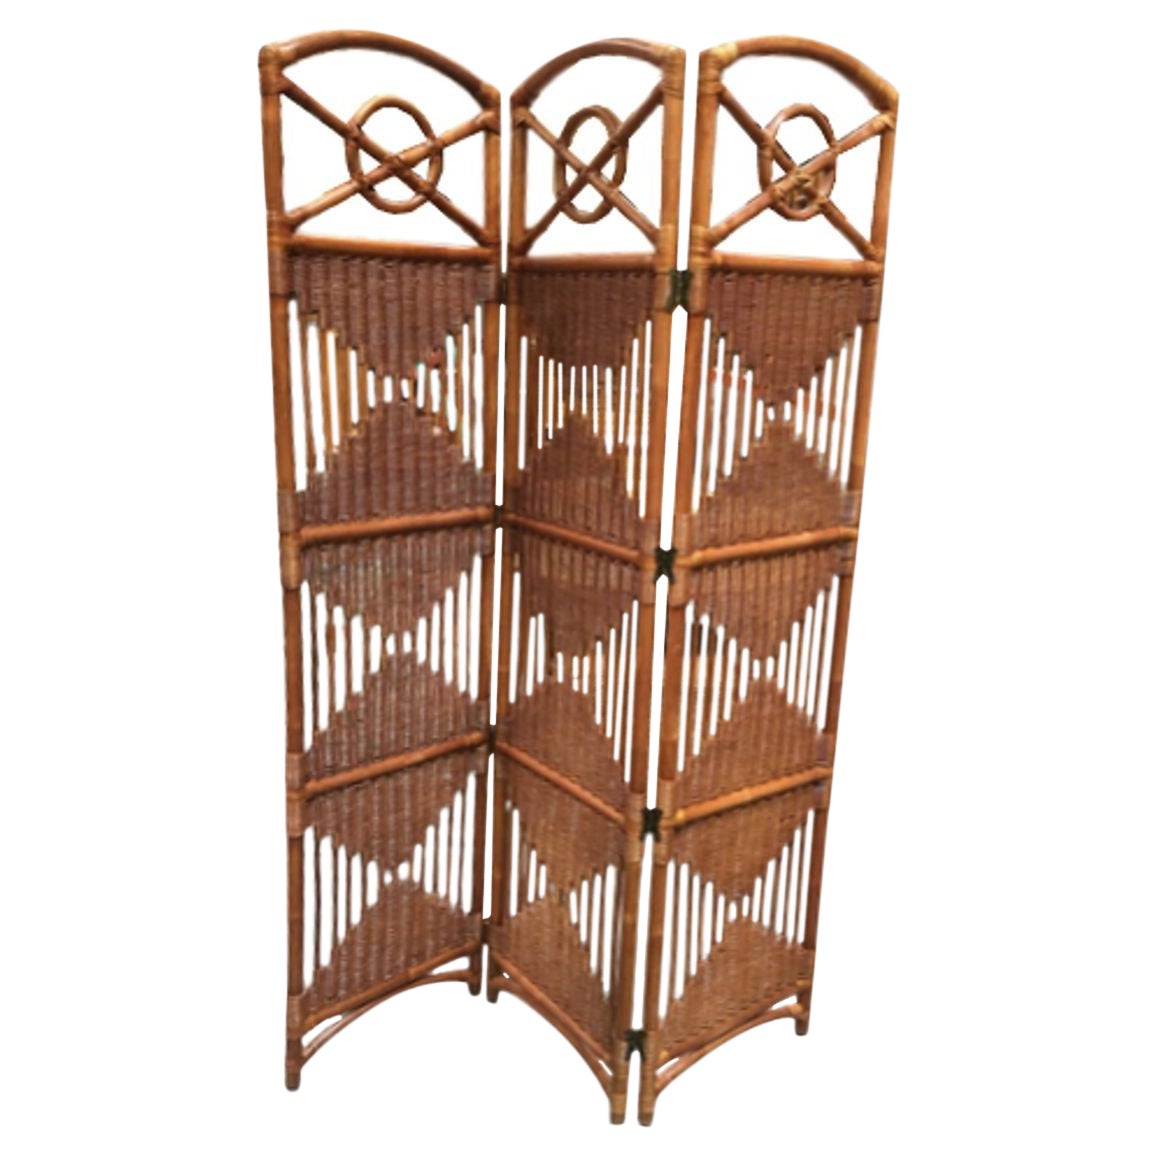 Folding Screen, Rattan and Woven Wicker 3 Panel For Sale